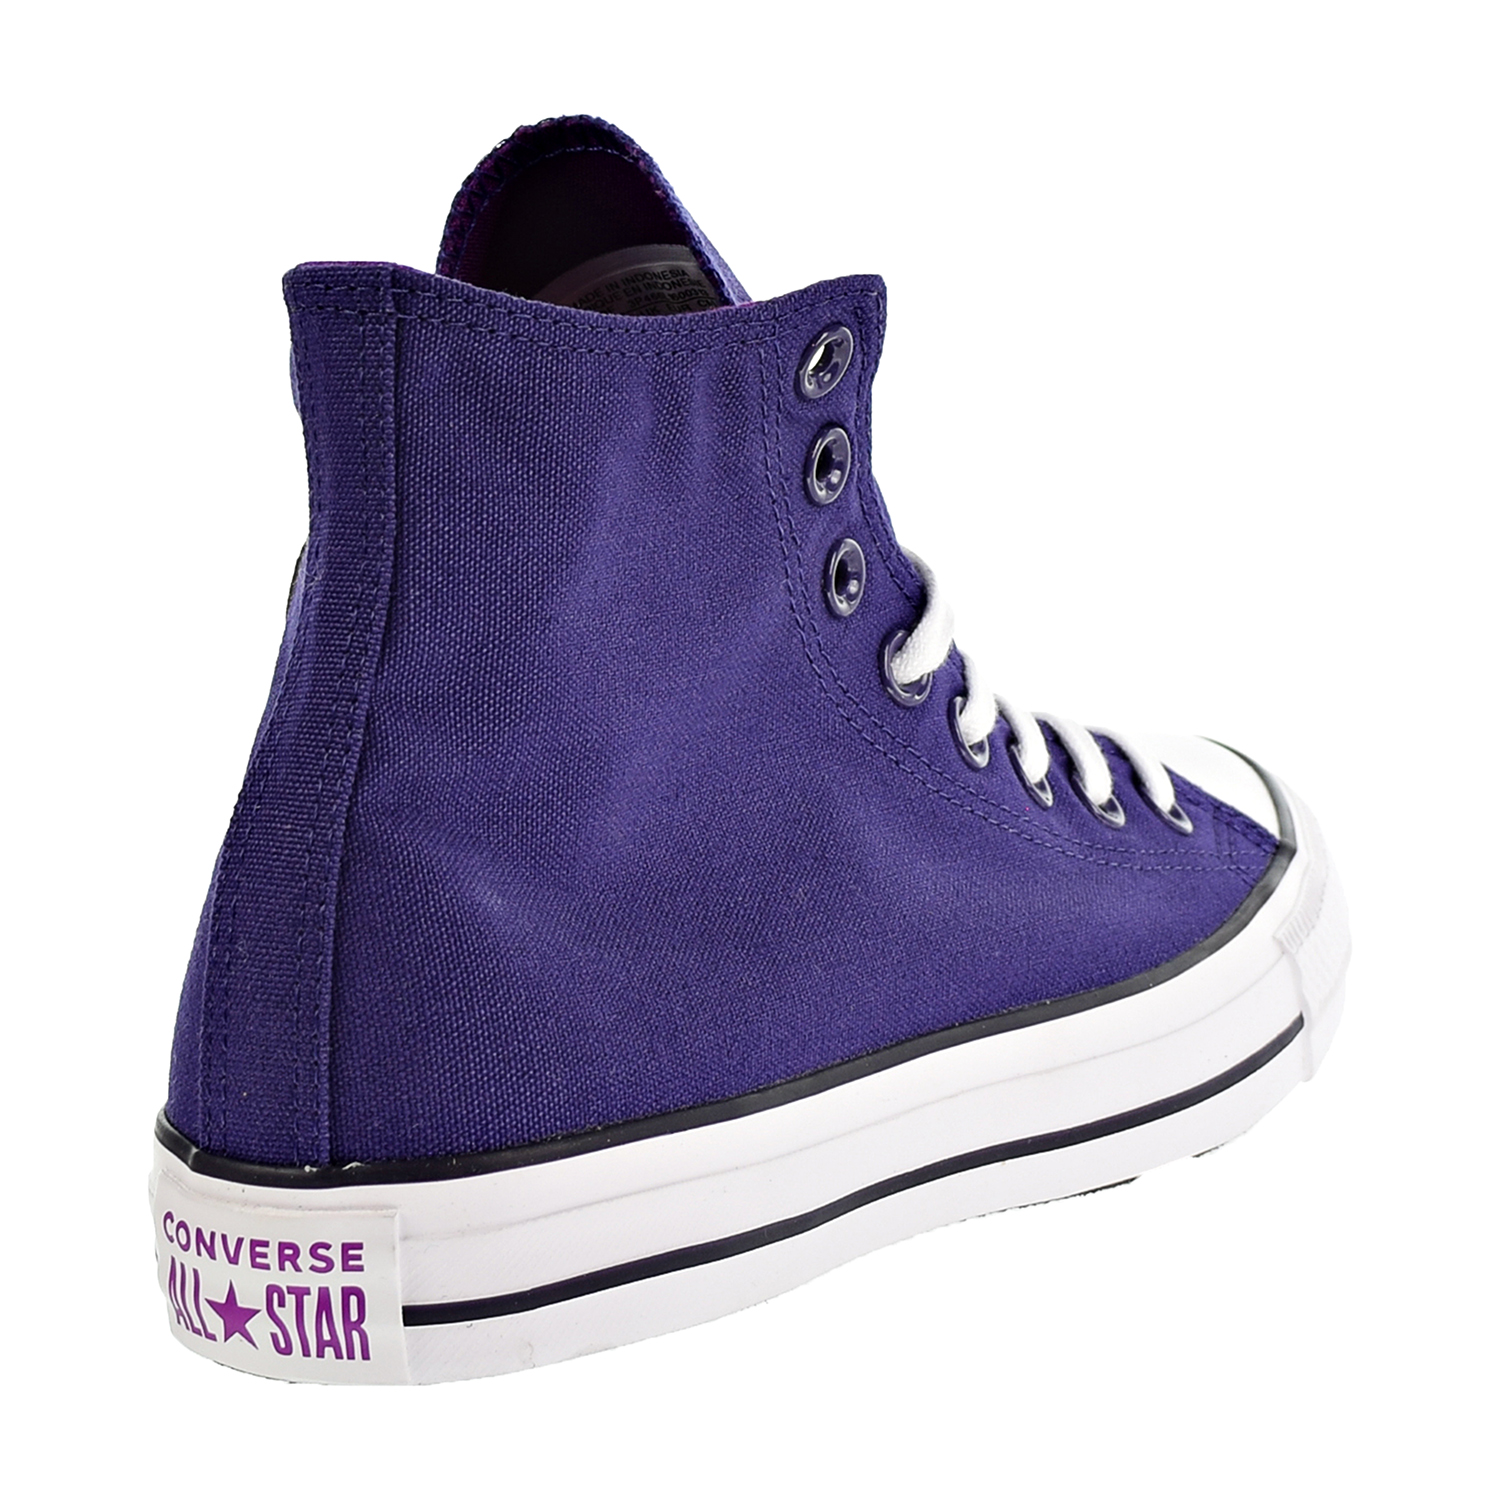 Converse Chuck Taylor All Star Seasonal Color Hi Unisex/Men's Shoes New Orchid 162450f - image 3 of 6